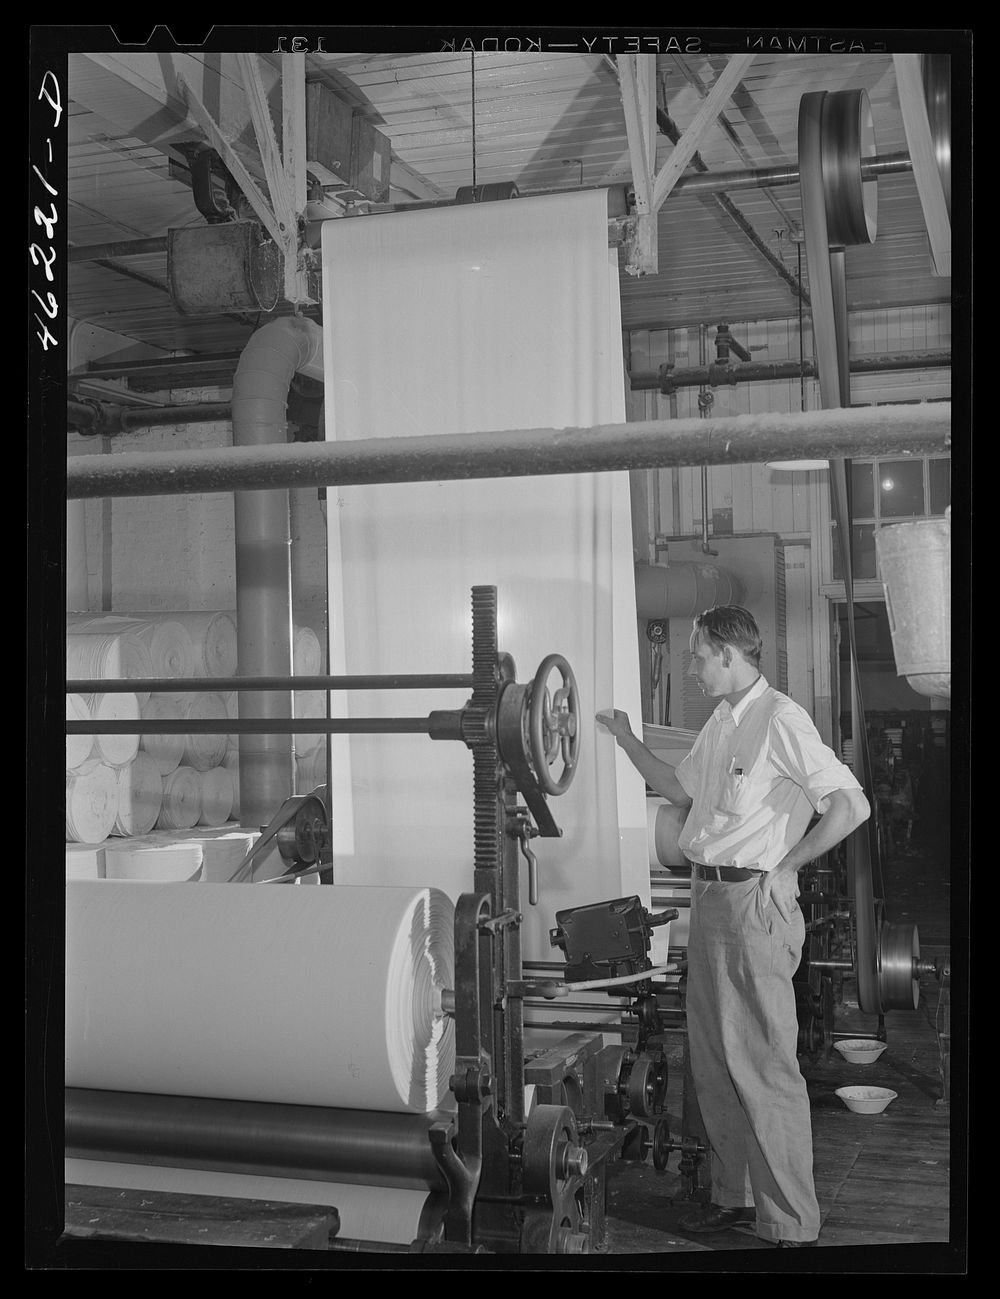 Greensboro, Georgia. In the Mary-Leila cotton mill. Sourced from the Library of Congress.